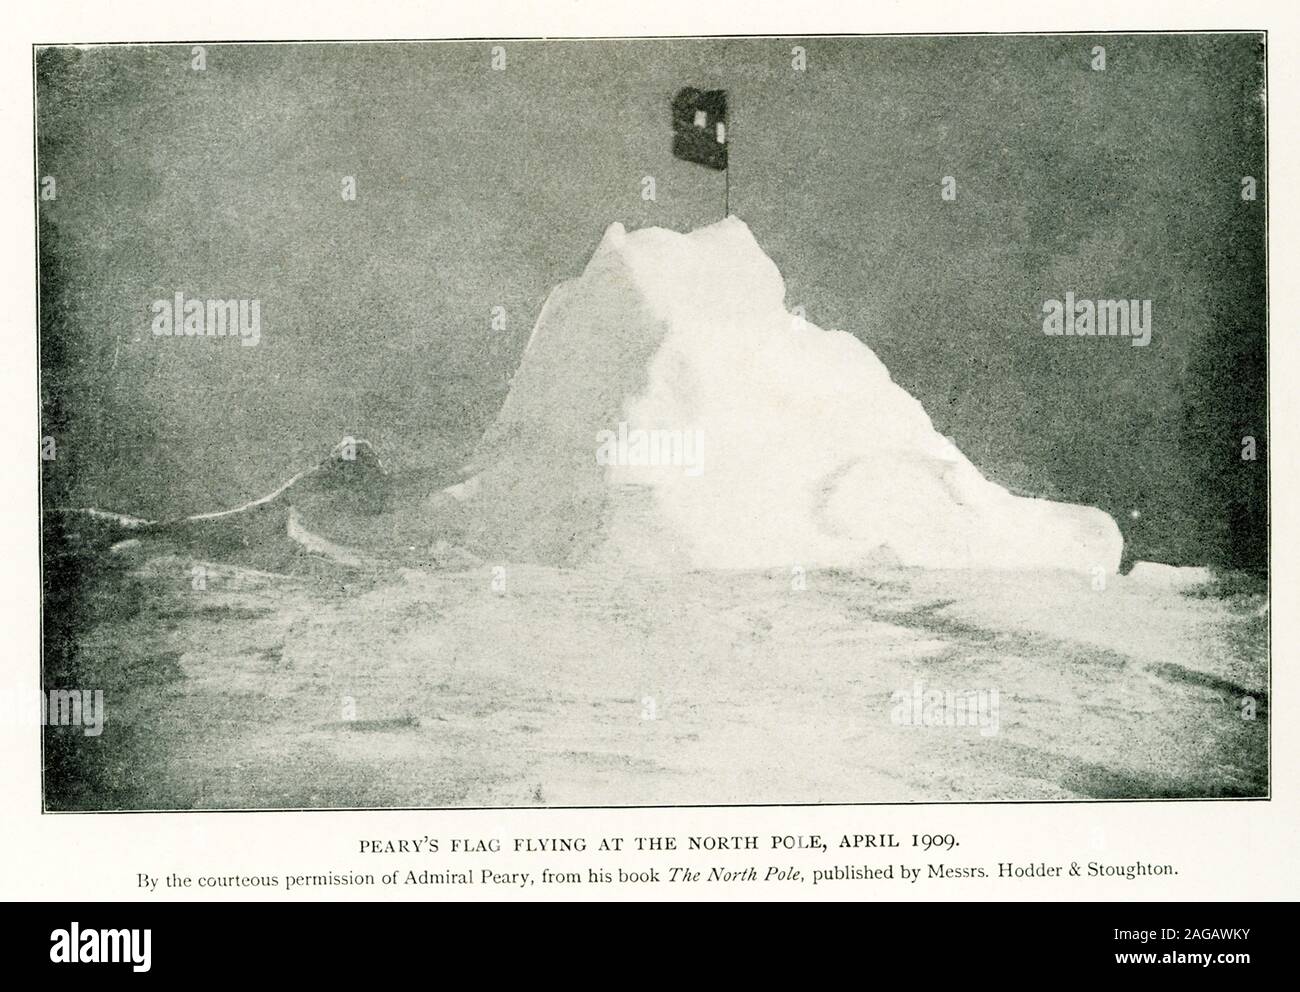 This photo shows Peary’s flag flying at the north Pole, April 1909. By the courteous permission of Admiral Peary, from his book The North Pole, published by Messrs. Hodder & Stoughton. Peary was an American explorer and United States Navy officer who made several expeditions to the Arctic in the late 19th and early 20th centuries. He is best known for claiming to have reached the geographic North Pole with his expedition on April 6, 1909. Stock Photo